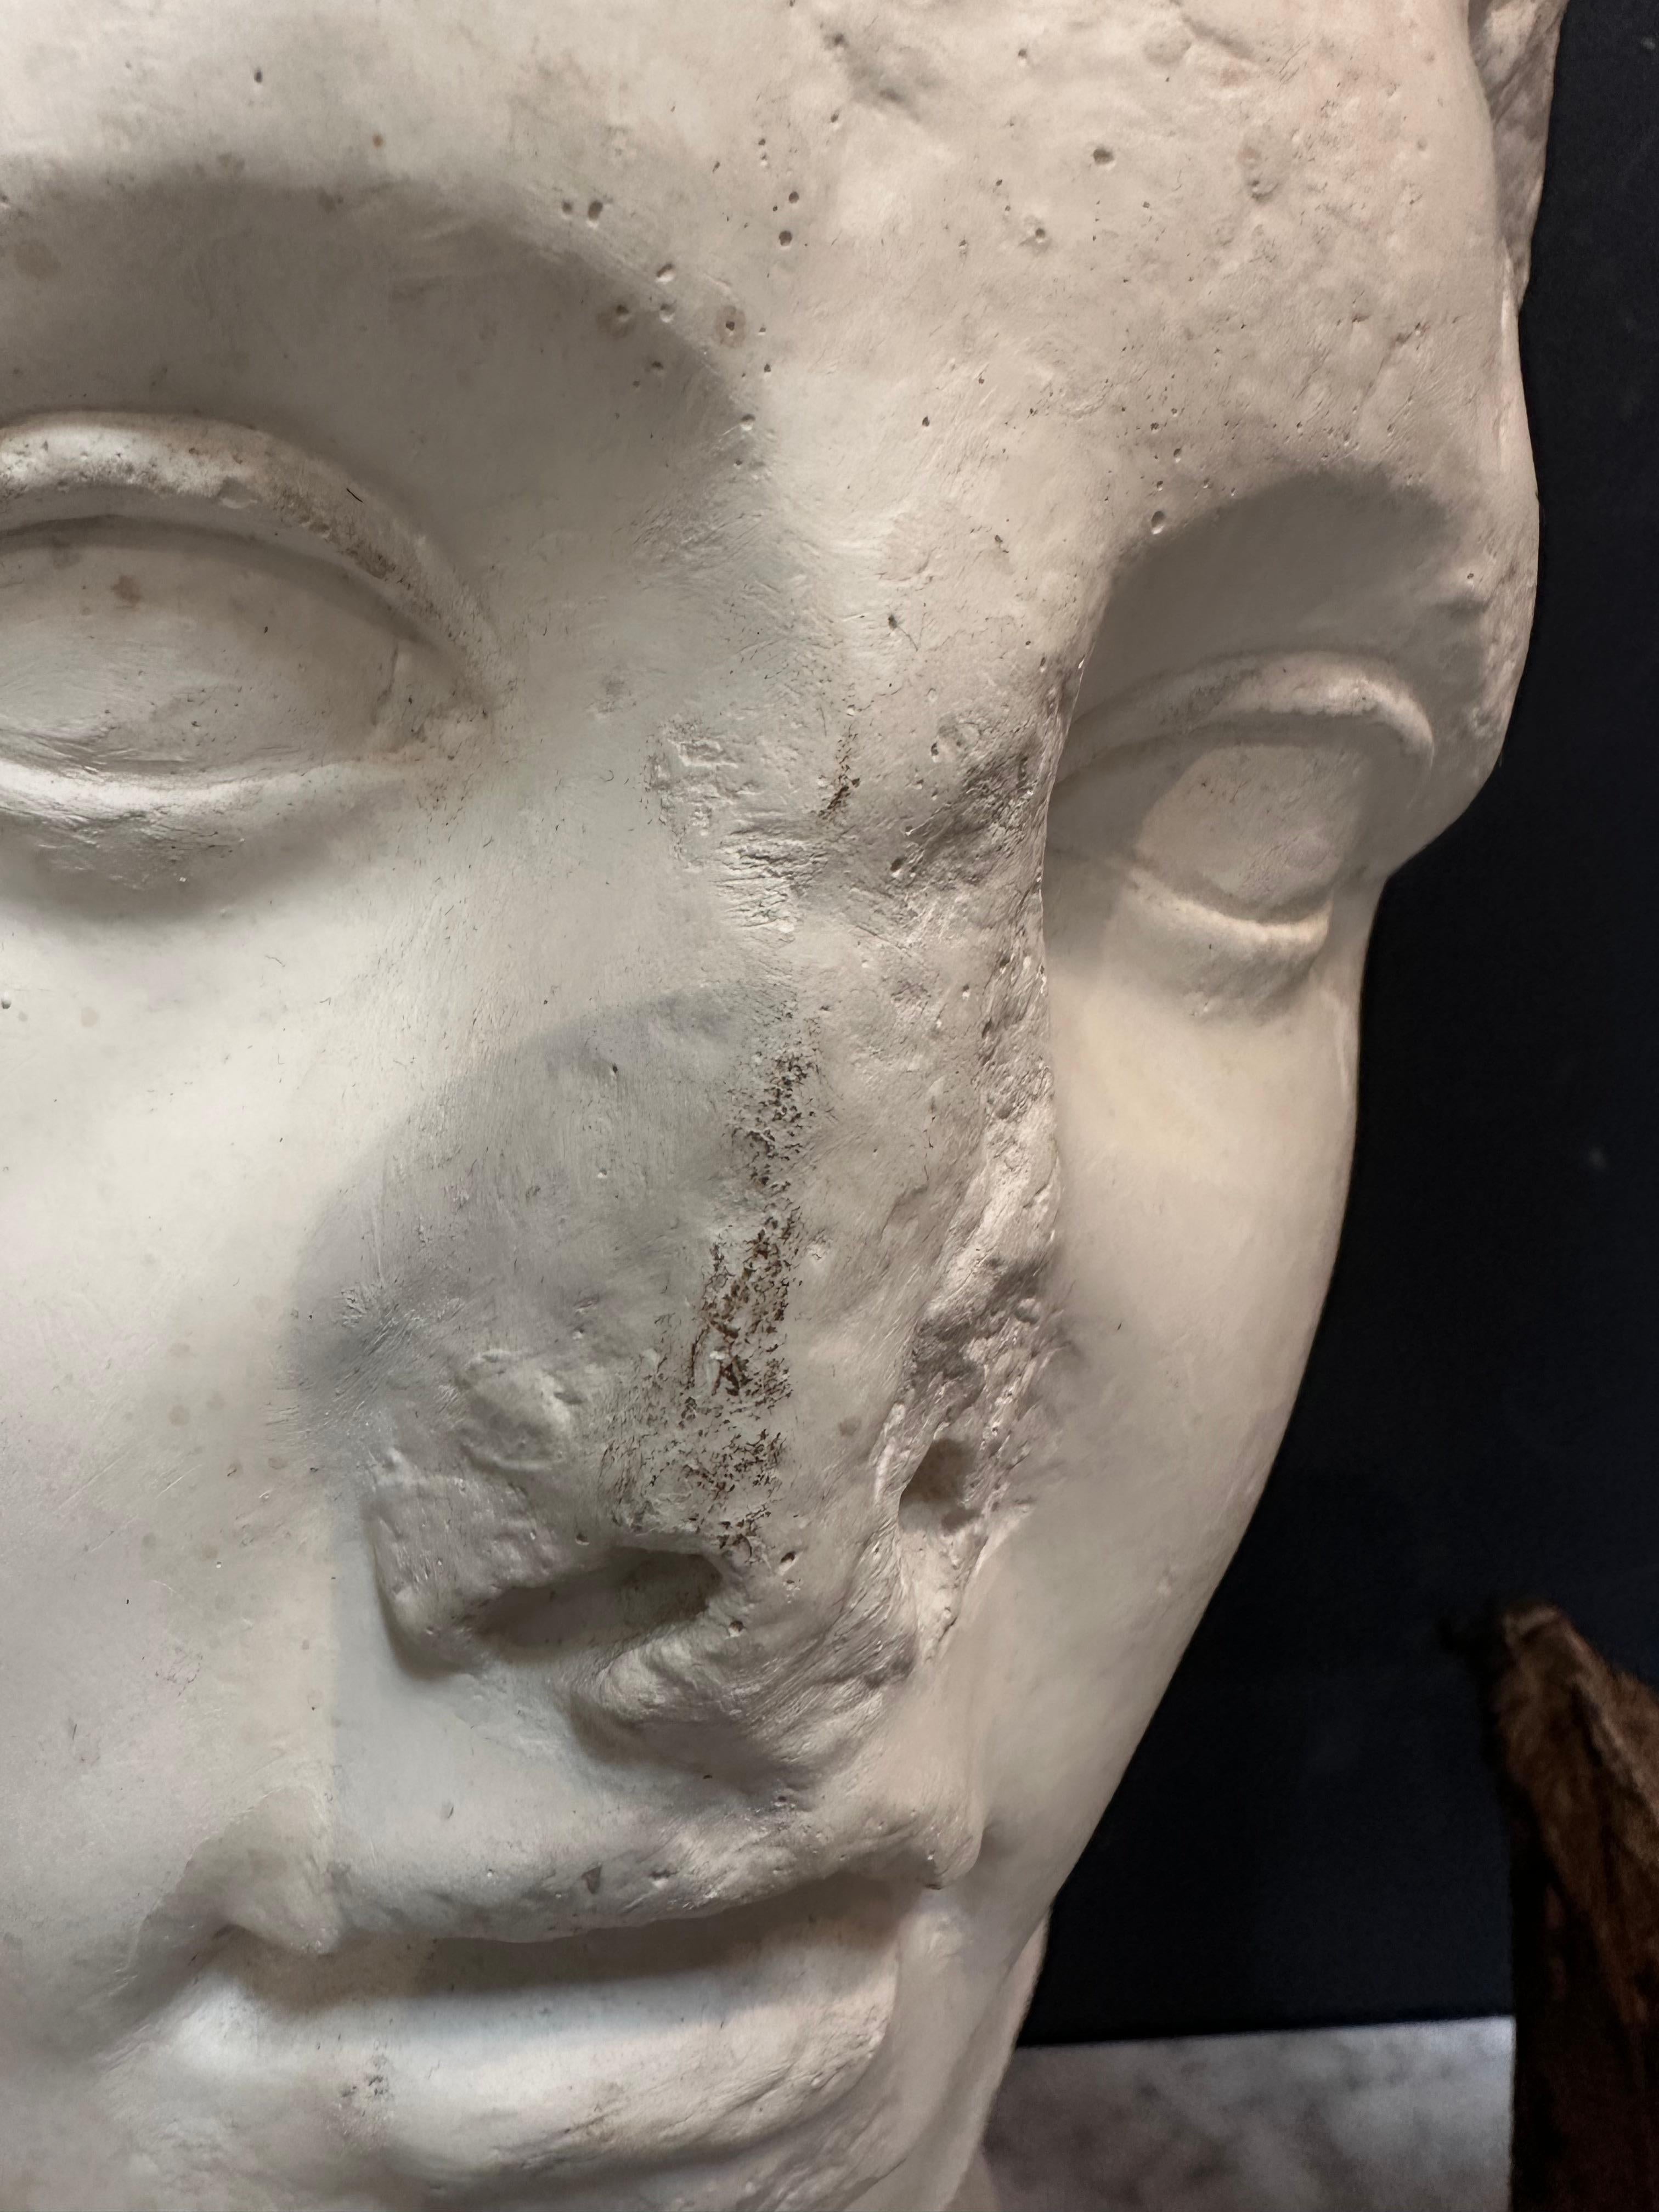 The Vintage Plaster Roman Head Sculpture from the 1970s is a classic art piece capturing a Roman-style head in plaster material. Crafted during the 1970s, this sculpture showcases the artistic style of the era with its detailed portrayal of a Roman